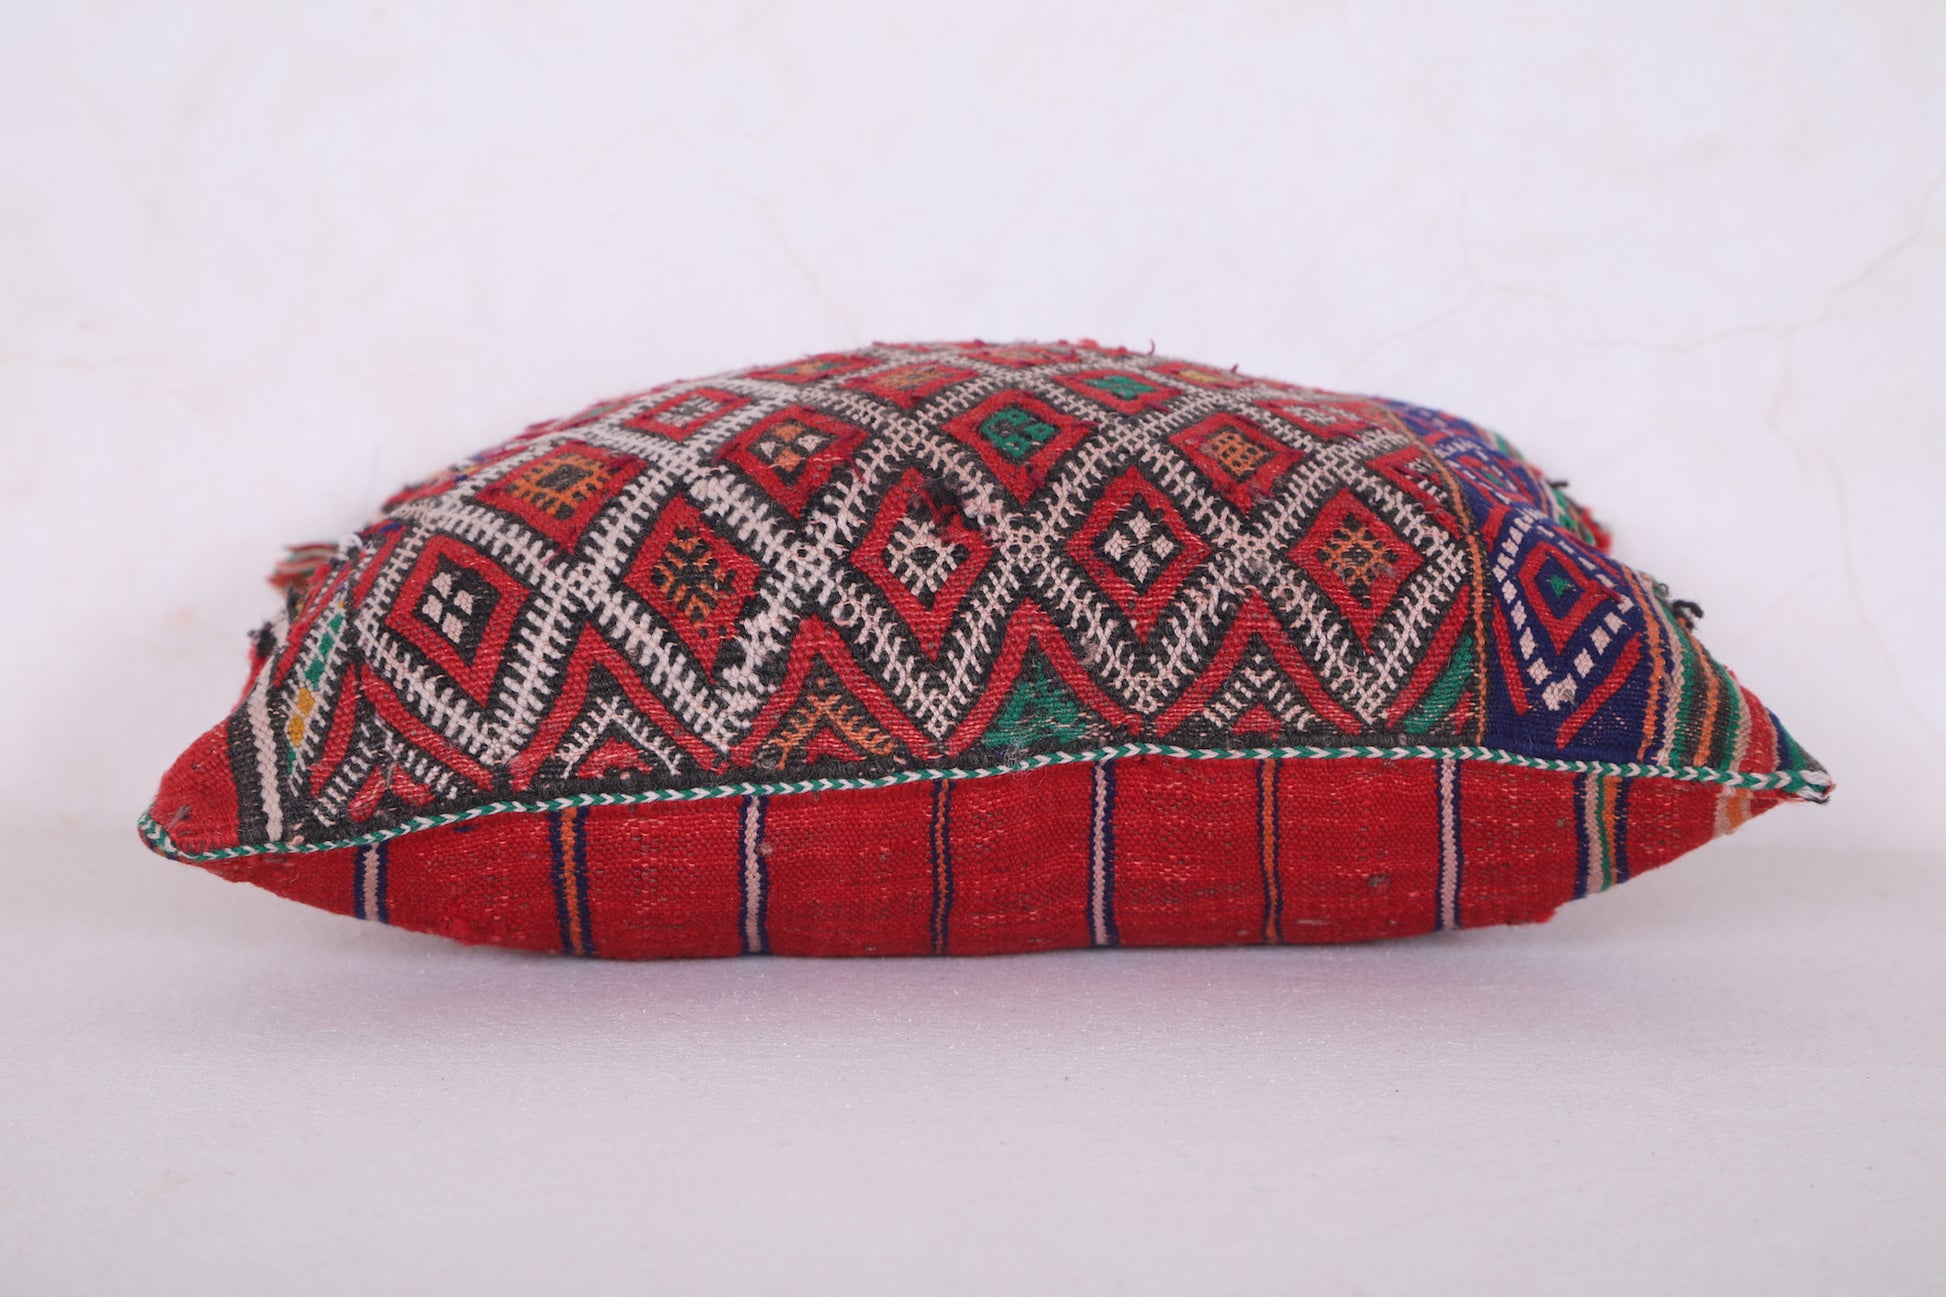 Small moroccan pillow 13.7 INCHES X 16.1 INCHES